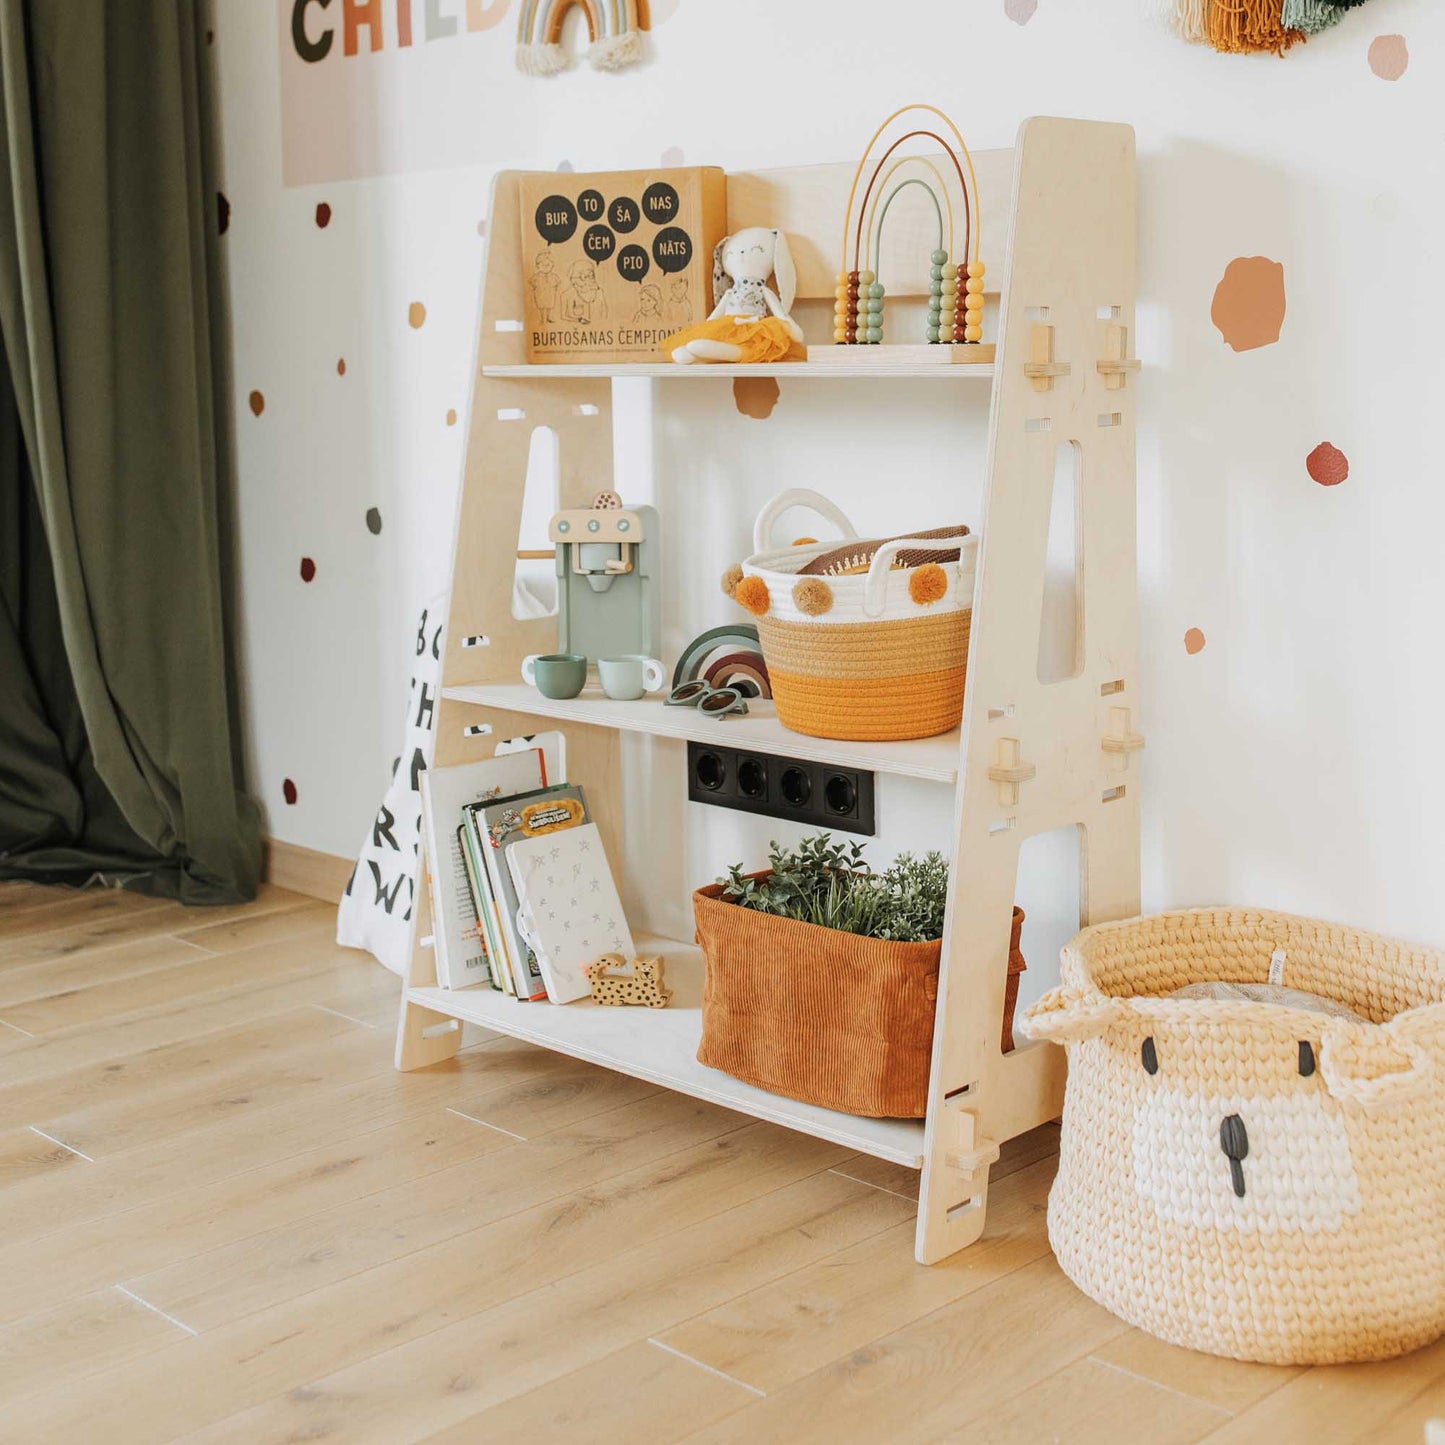 A child's room with an open Montessori toy shelf featuring wooden baskets for organizing toddler toys by Sweet Home From Wood.